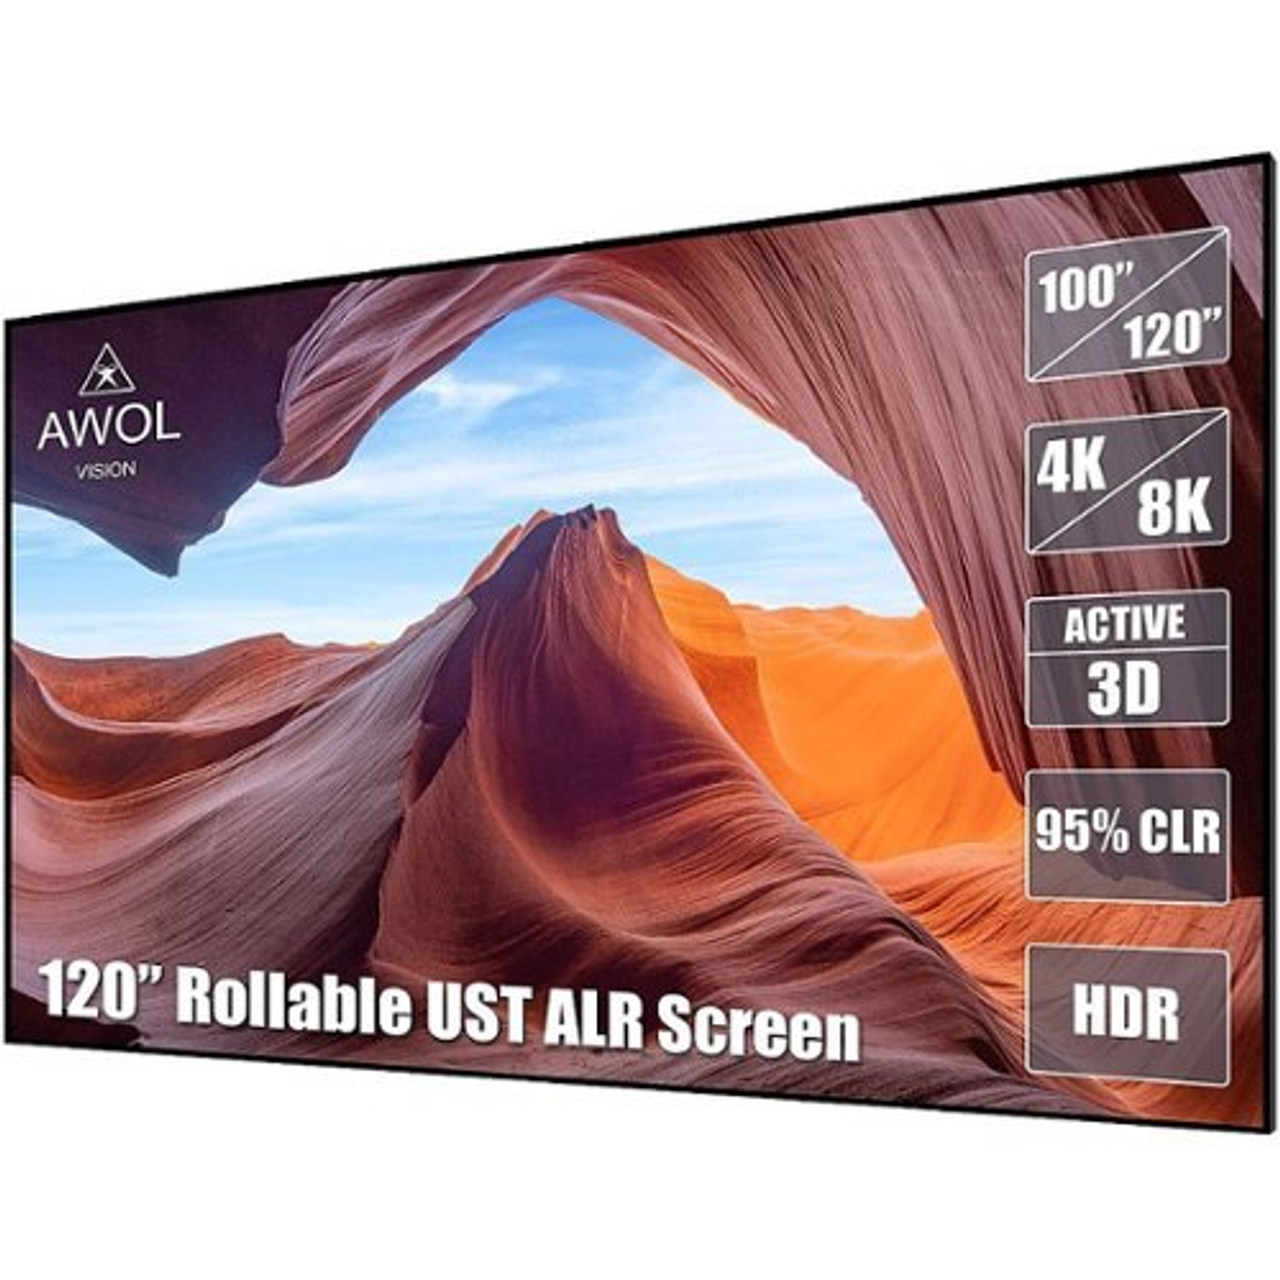 AWOL Vision - 100" Wall Mount Projector Screen - Gray